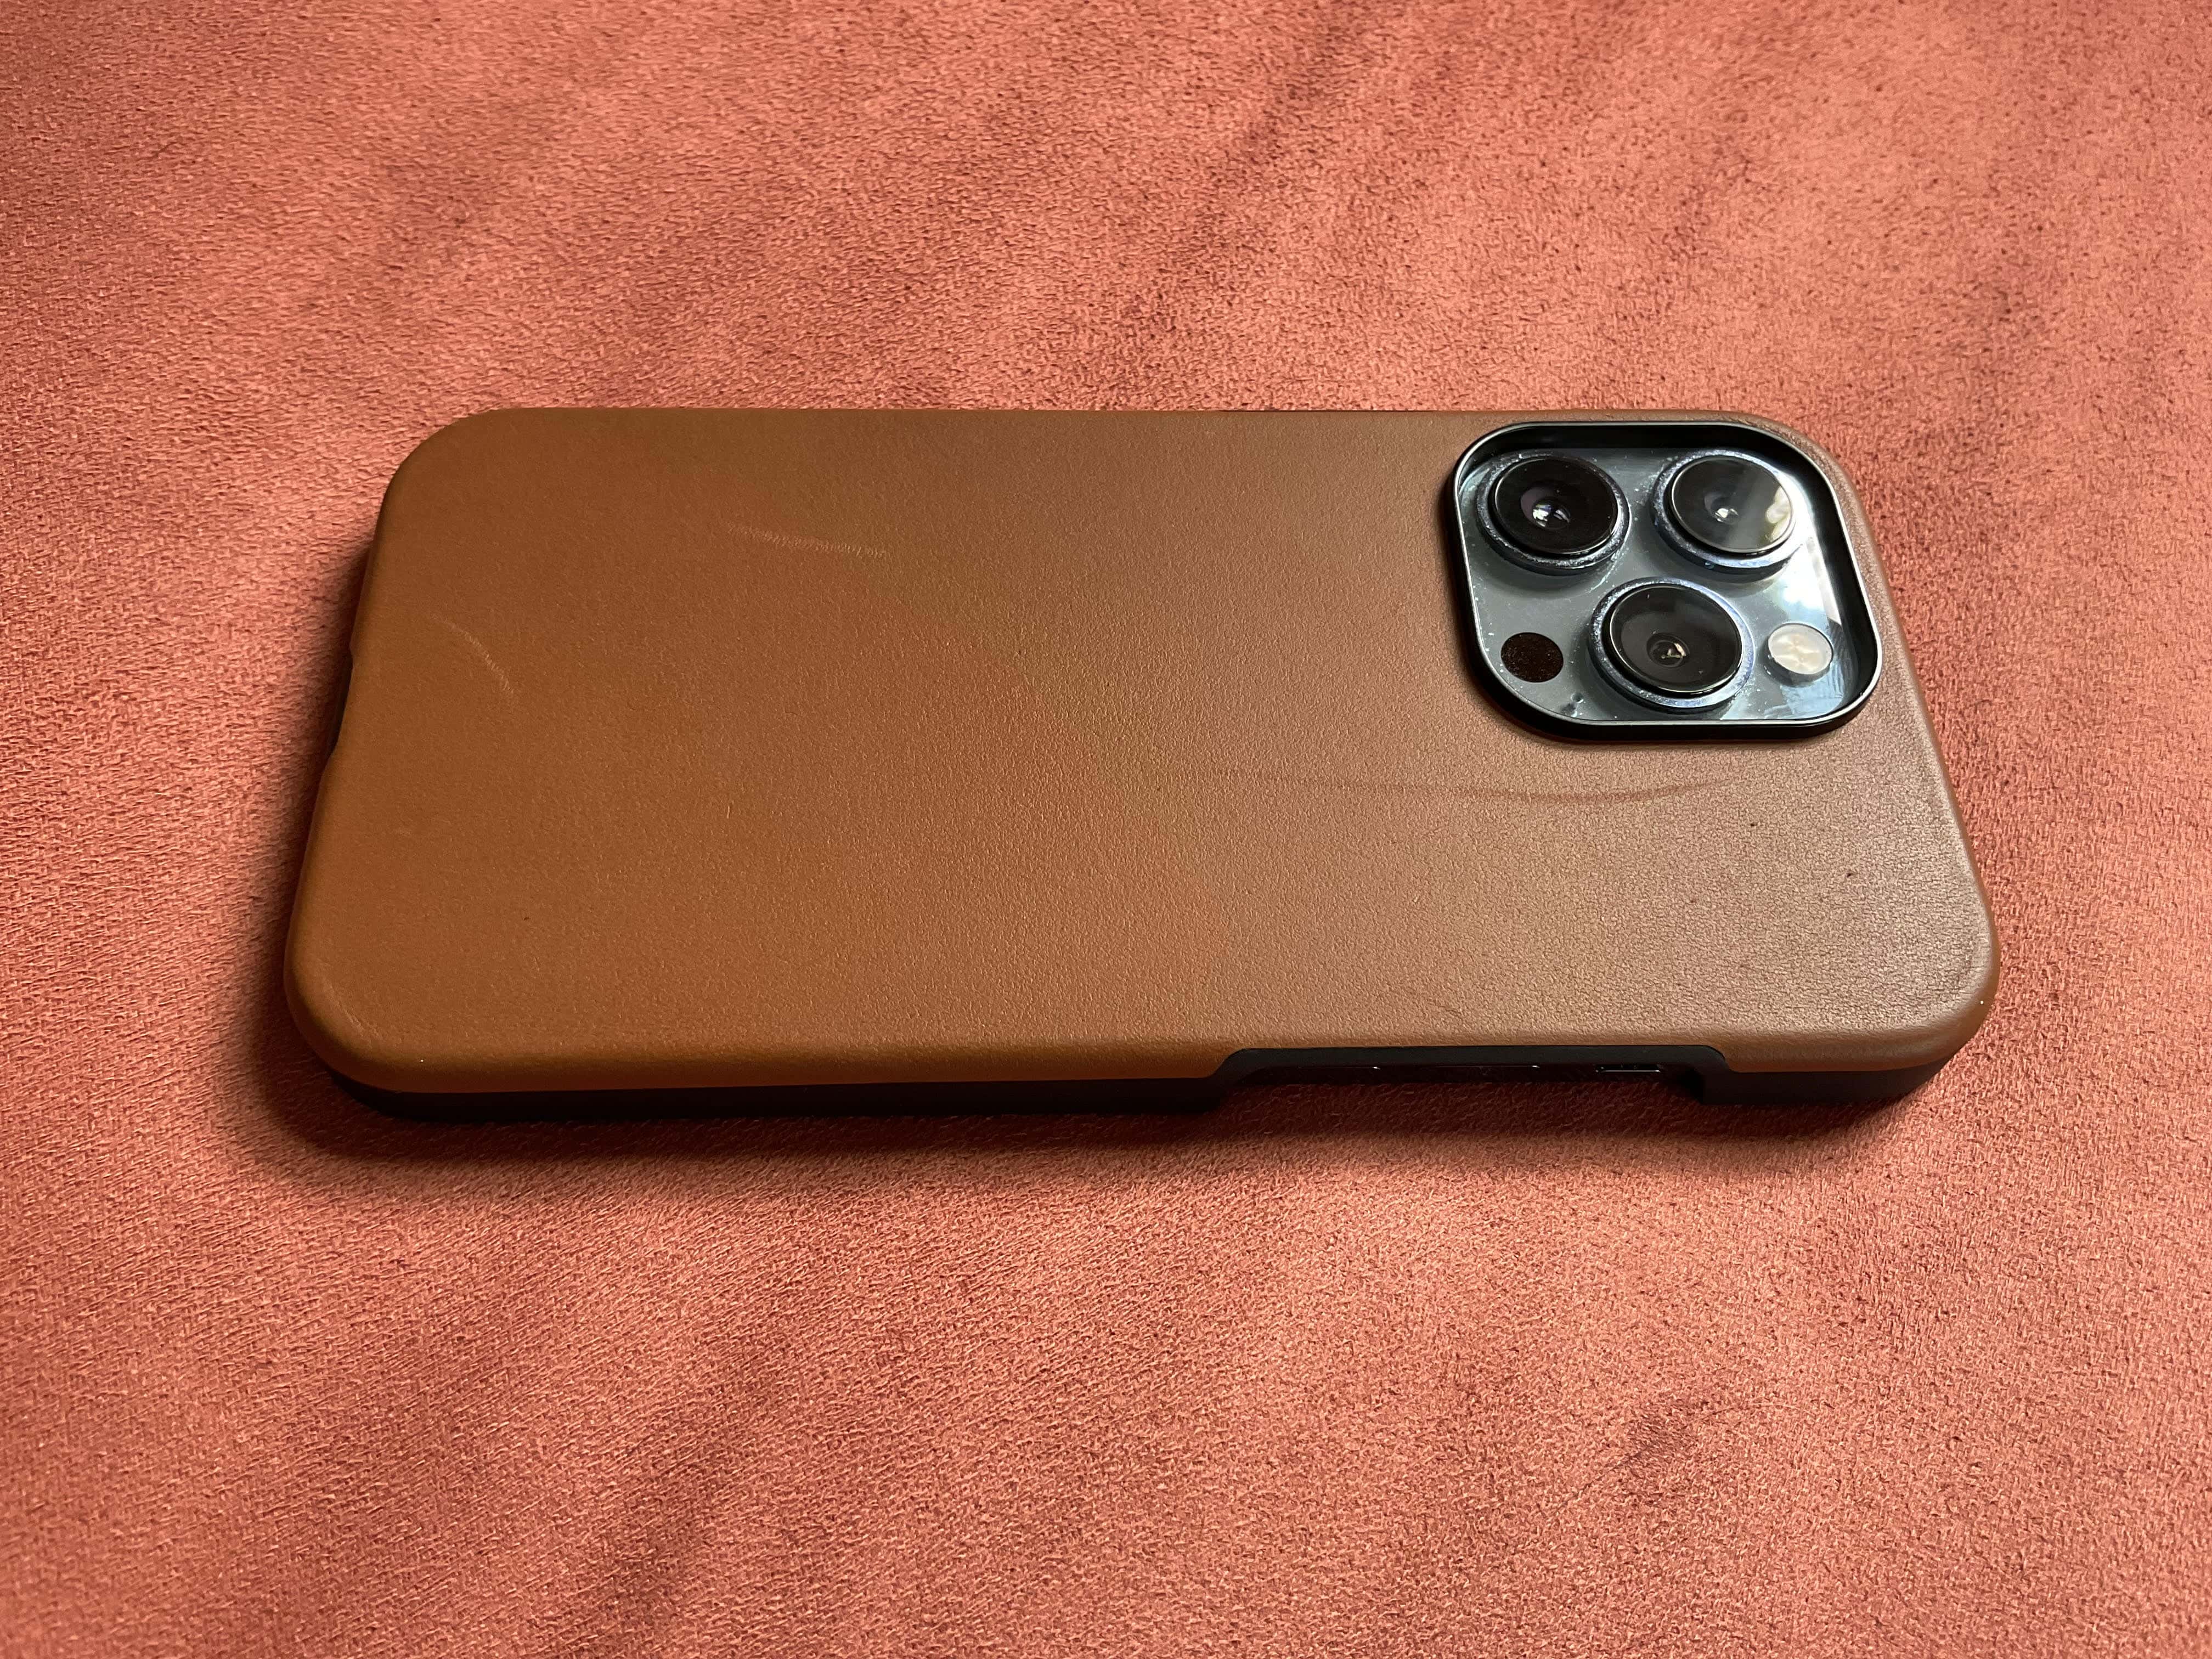 Journey's protective iPhone 13 leather case feels just right